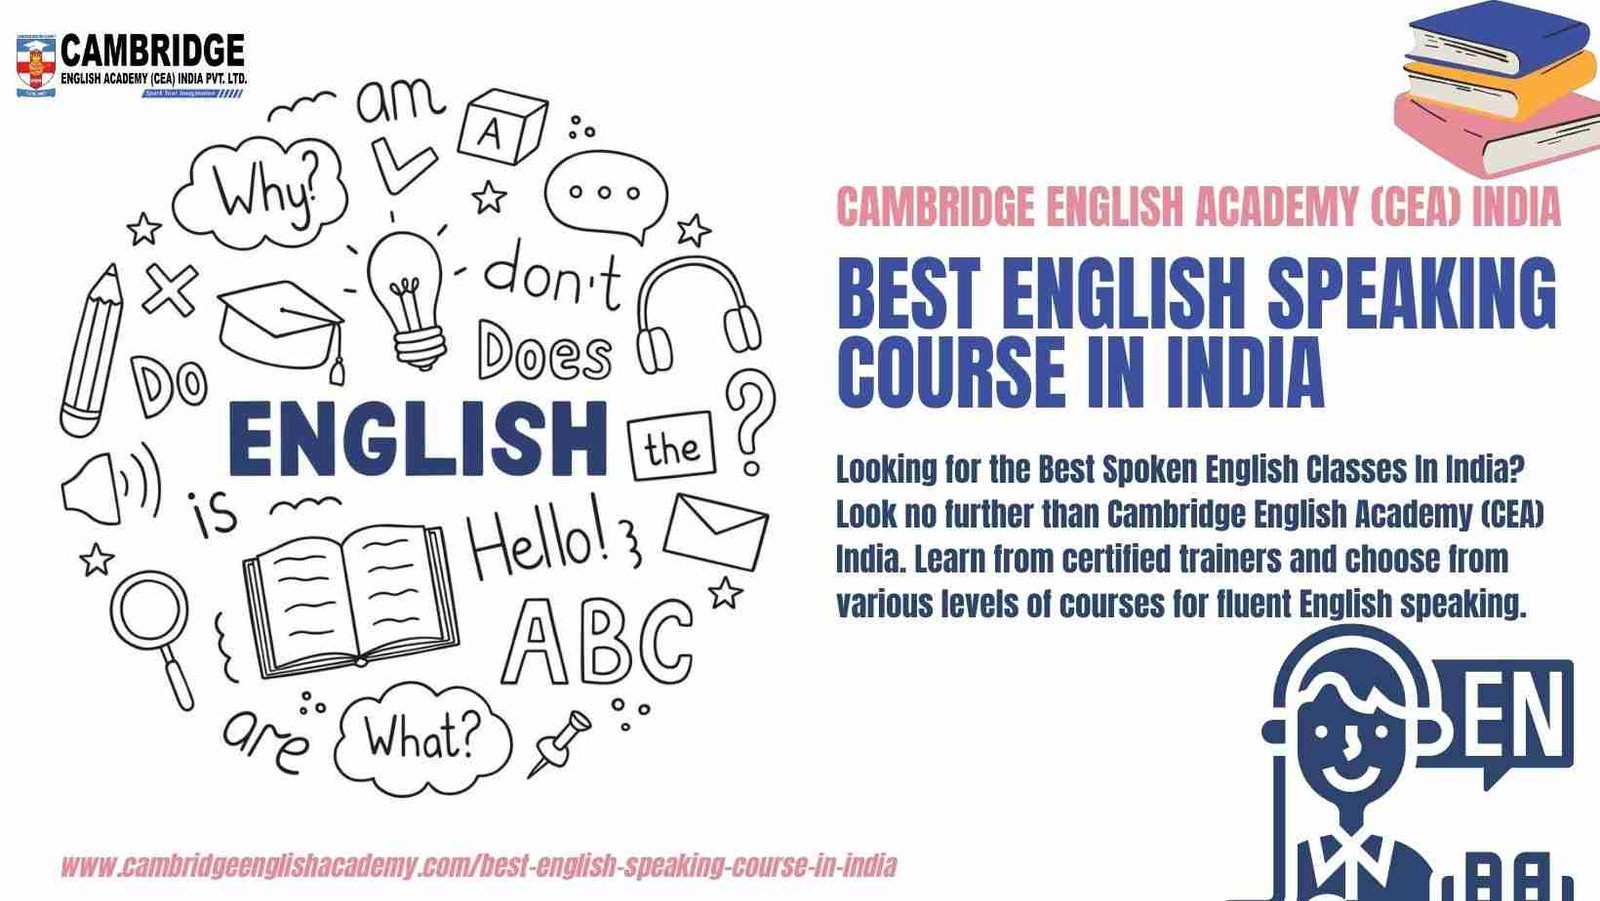 Best English Speaking Course in India